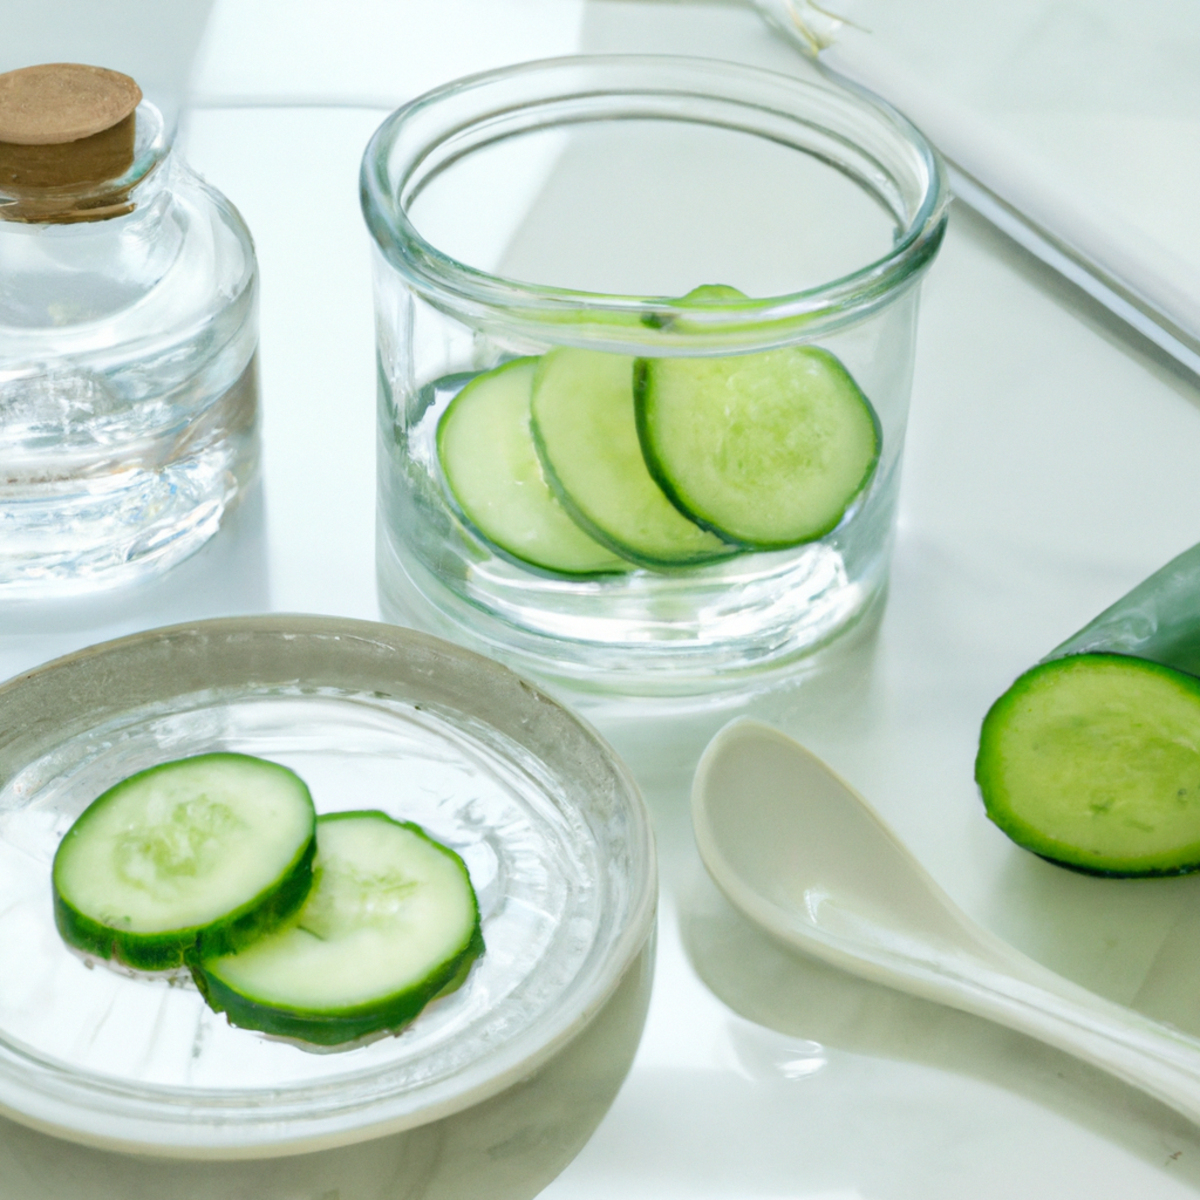 Close-up shot of serene scene with cucumber slices, silk eye mask, and green tea leaves, inviting readers to explore natural beauty remedies for rejuvenated eyes.